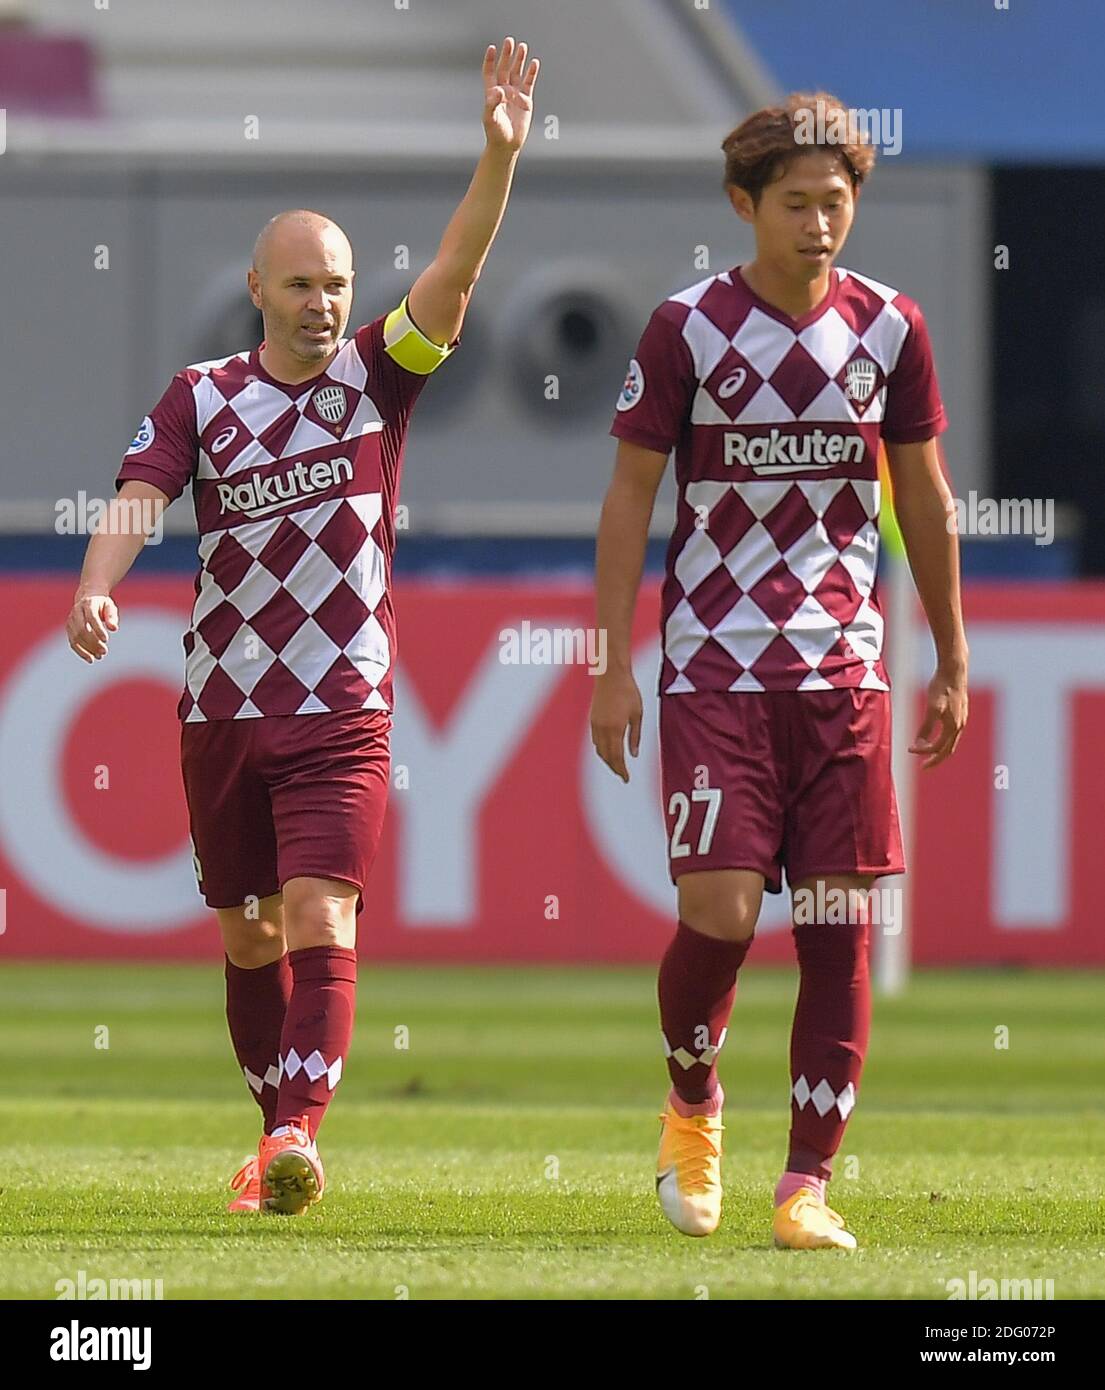 Doha, Qatar. 7th Dec, 2020. Andres Iniesta (L) of Vissel Kobe celebrates his goal during the round of 16 match of the AFC Champions League between Shanghai SIPG FC of China and Vissel Kobe of Japan in Doha, Qatar, Dec. 7, 2020. Credit: Nikku/Xinhua/Alamy Live News Stock Photo